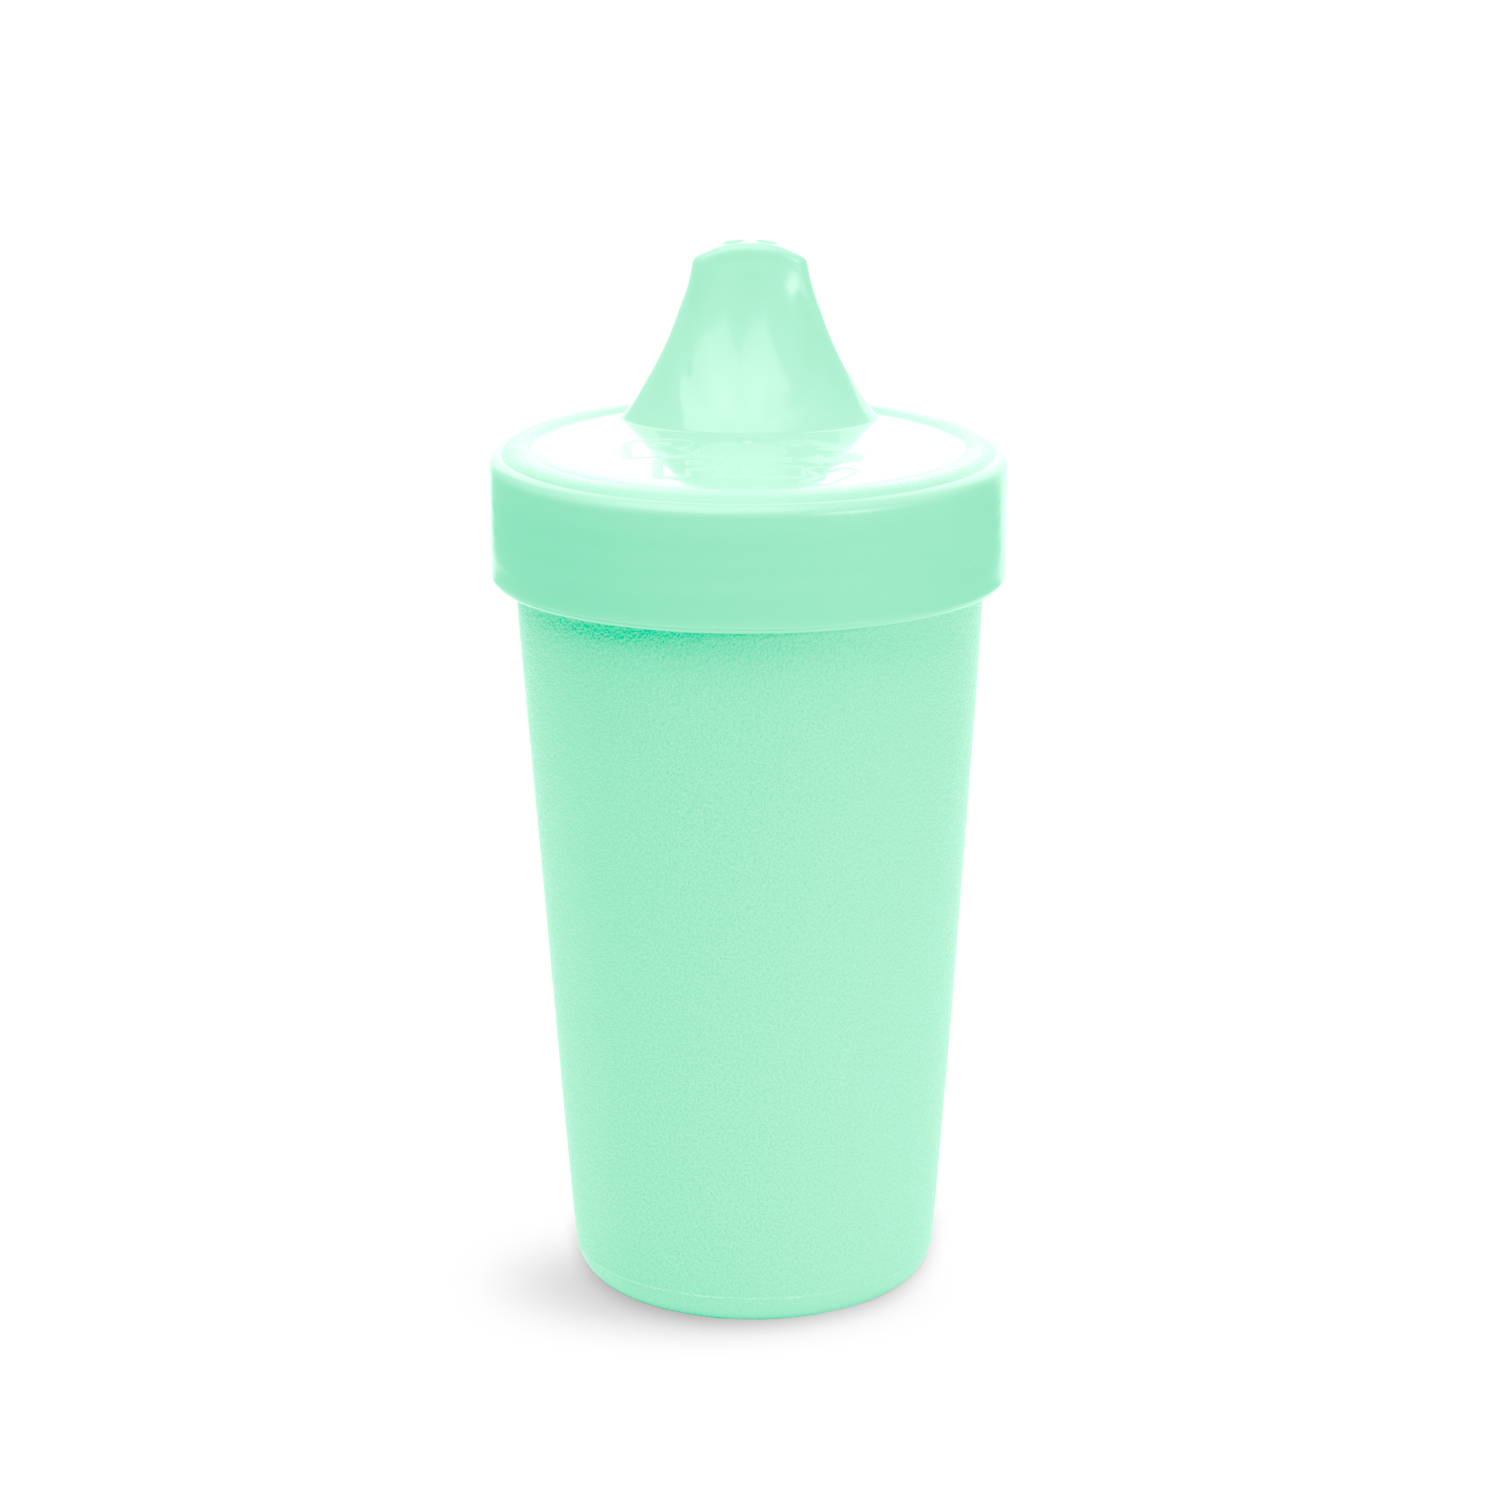 Spillproof Kennedy Cup :: adult no spill sippy cup